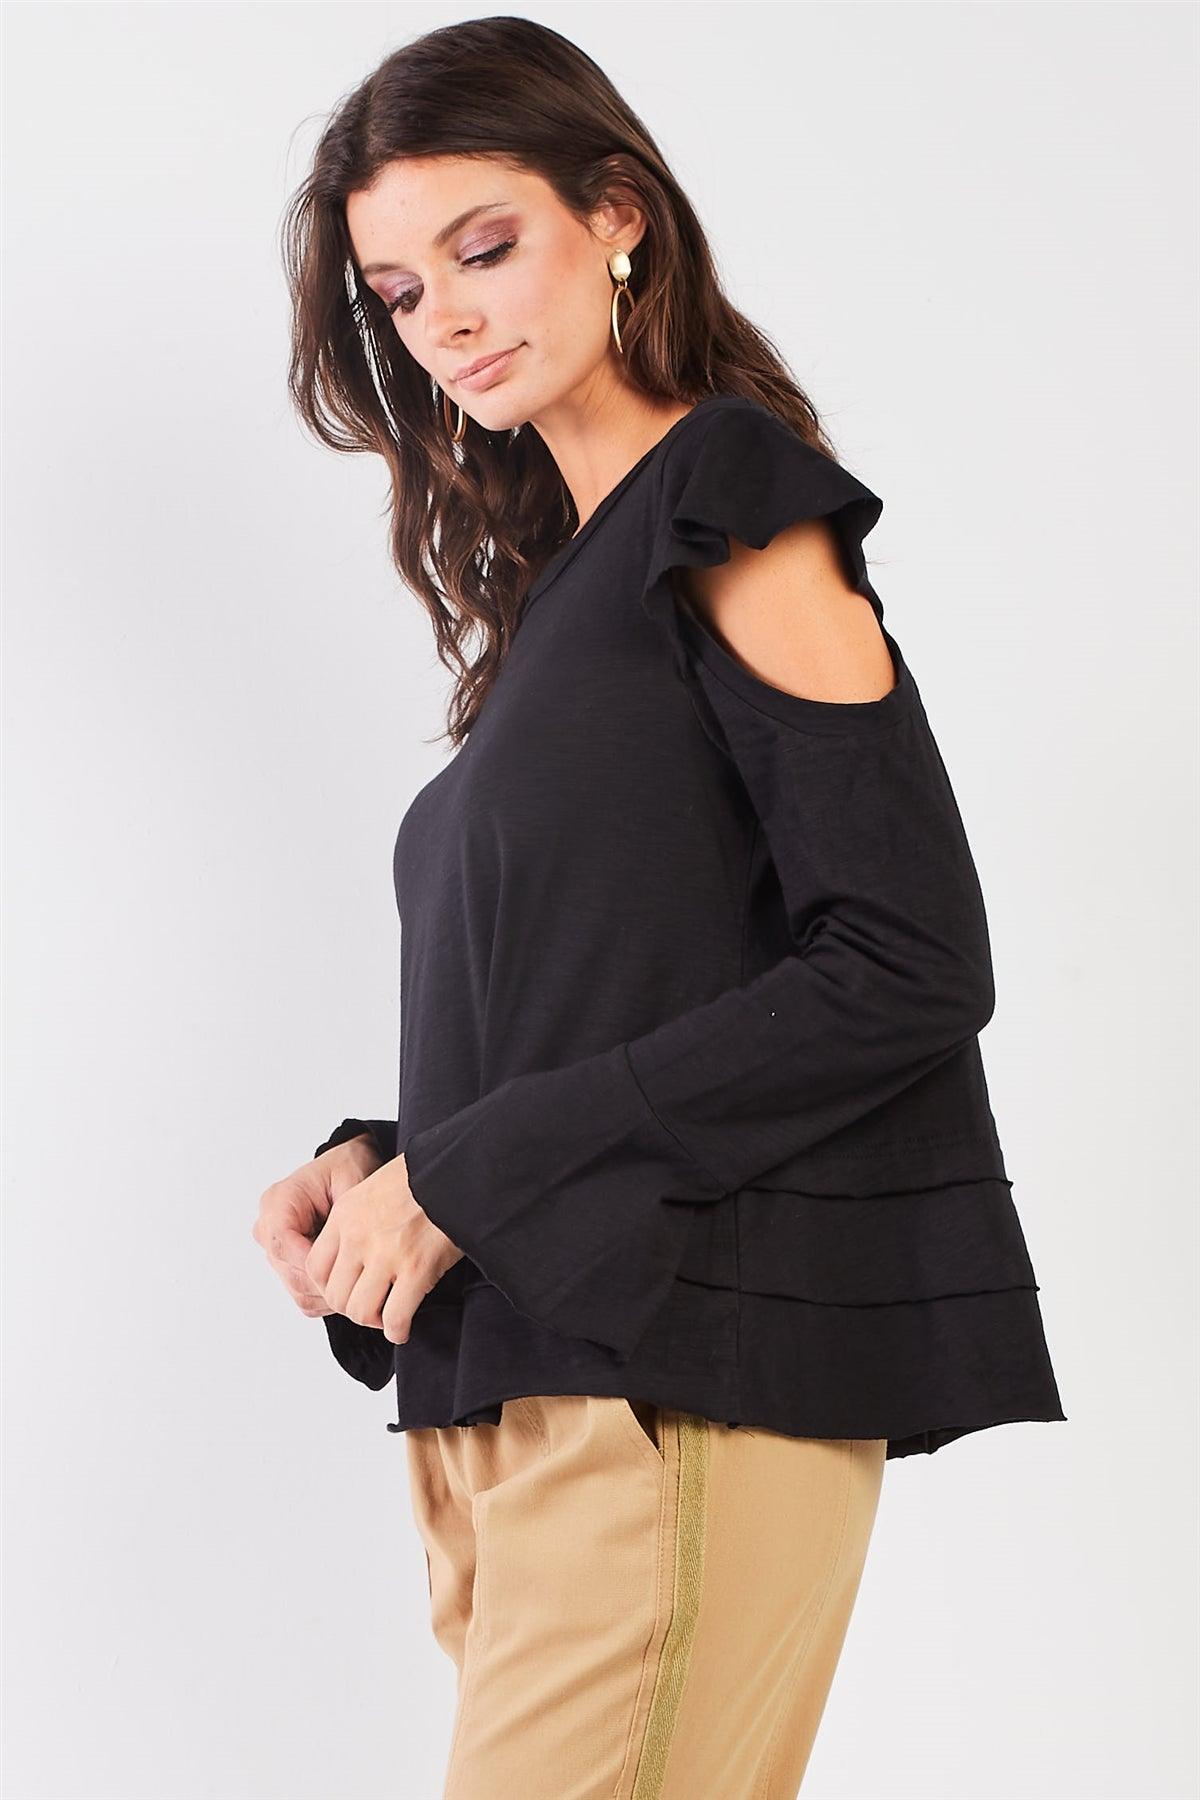 Black Cut-Out Shoulder Bell Sleeve Raw Edge Detail Layered Hem Top /2-2-2